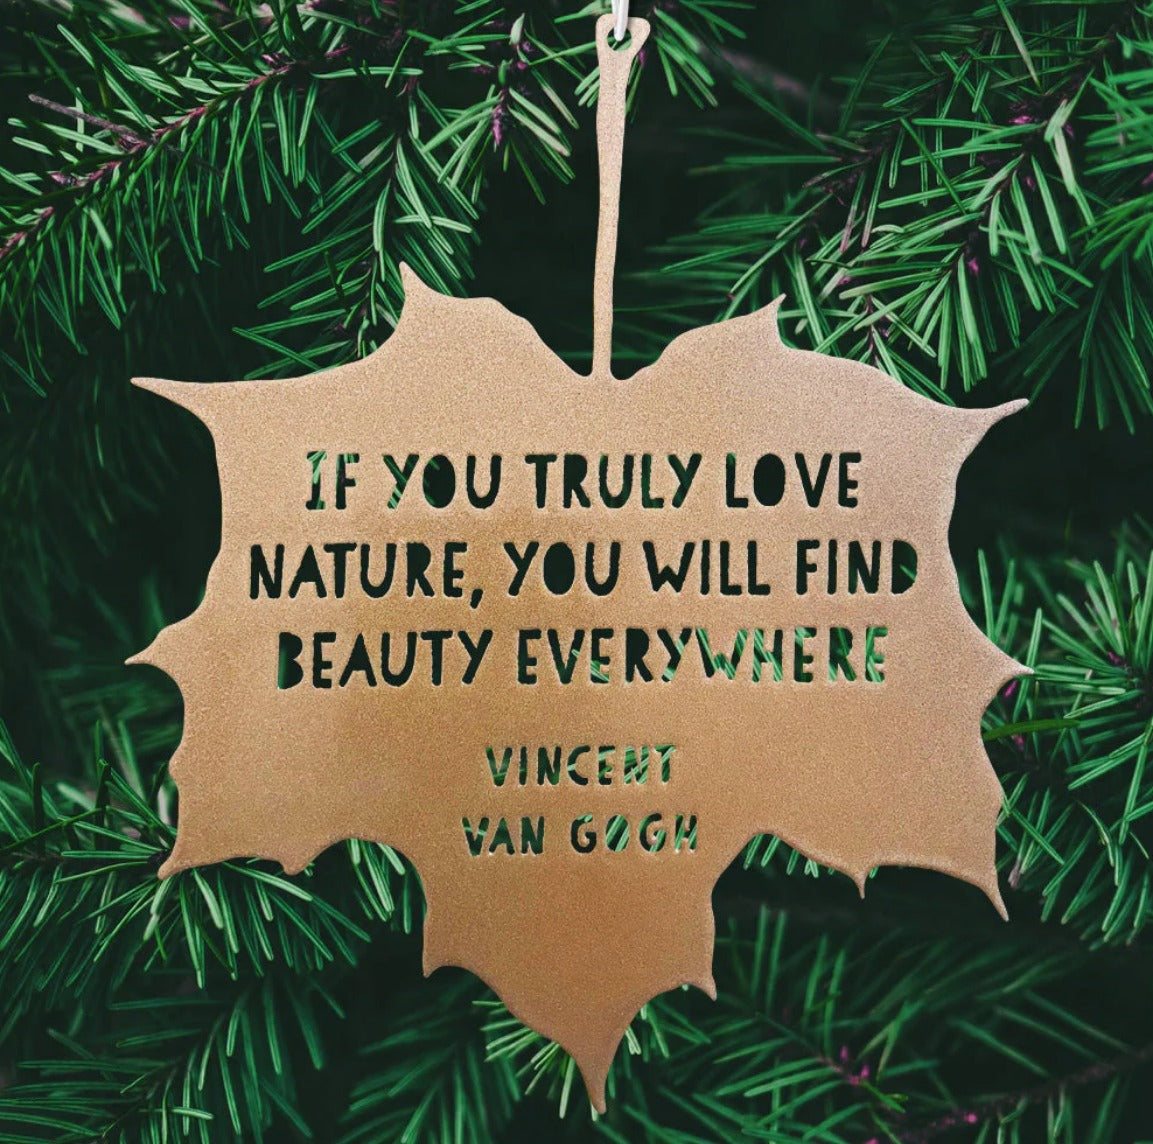 Leaf Quote - If you truly love nature you will find beauty everywhere - Vincent Van Gogh - The Bristol Artisan Handmade Sustainable Gifts and Homewares.